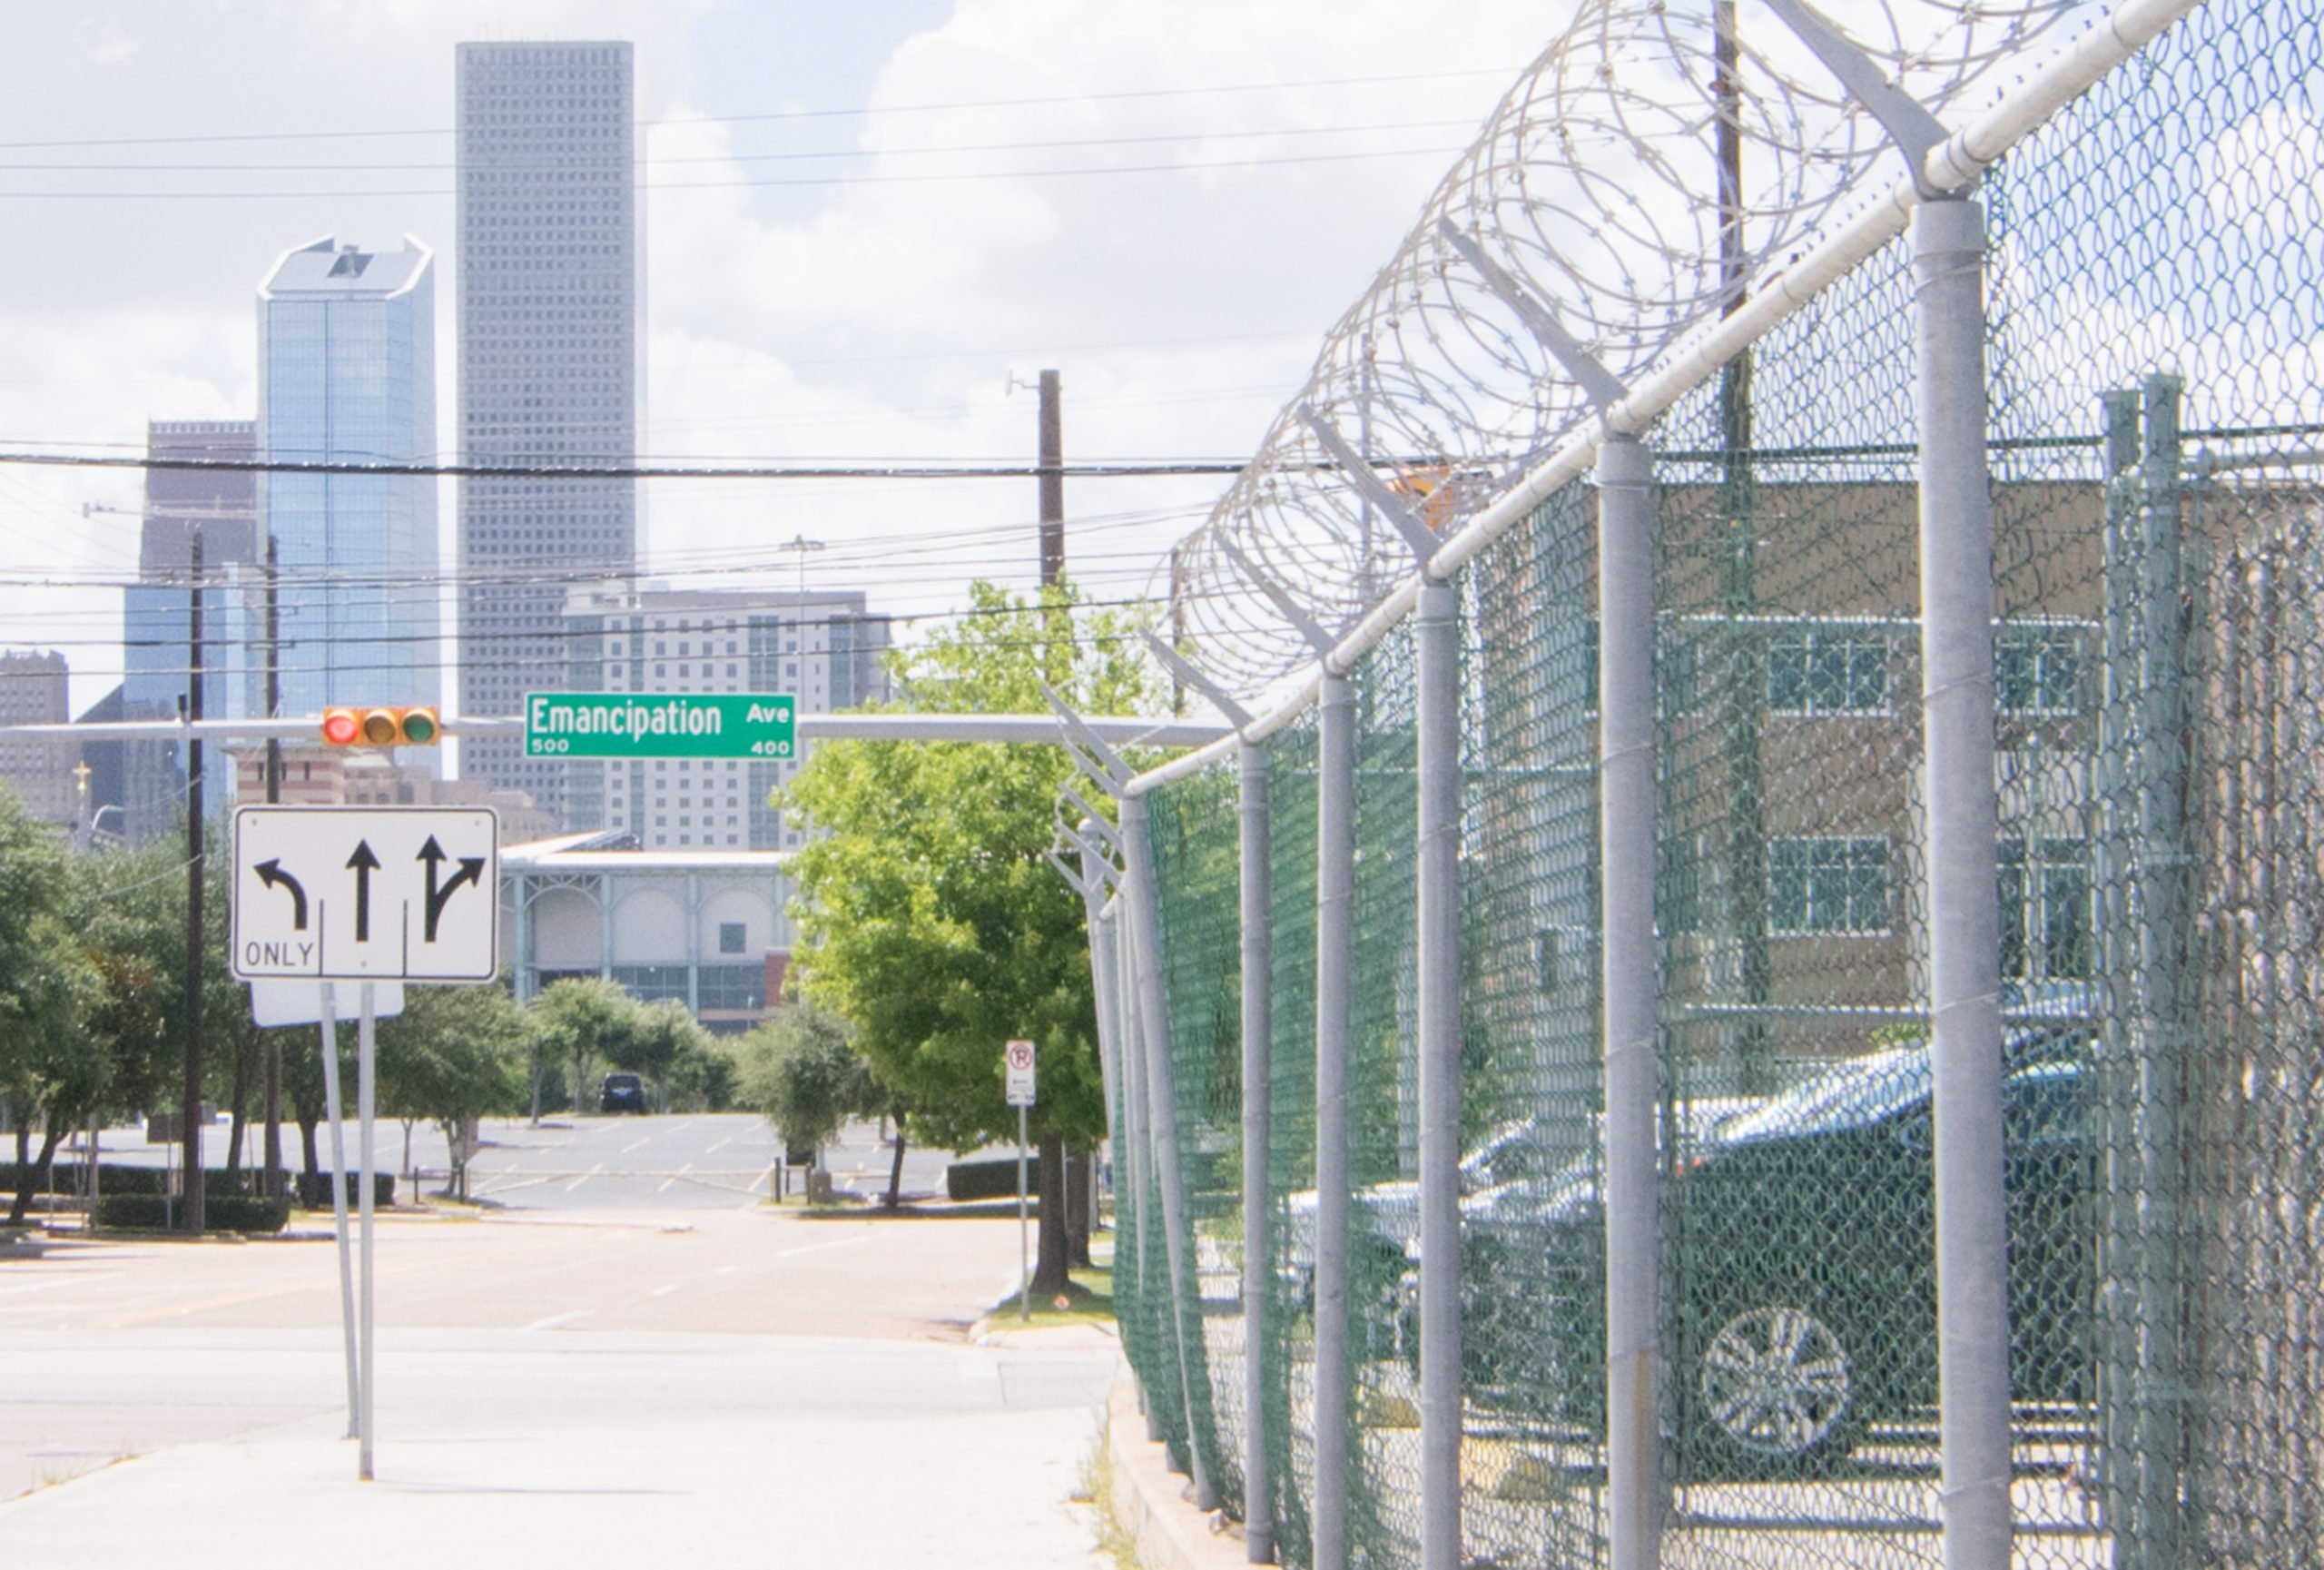 Southwest Key, a contractor with the federal government, signed a lease to house up to 240 immigrant children between the ages of 0 and 17 in Houston in June 2018.